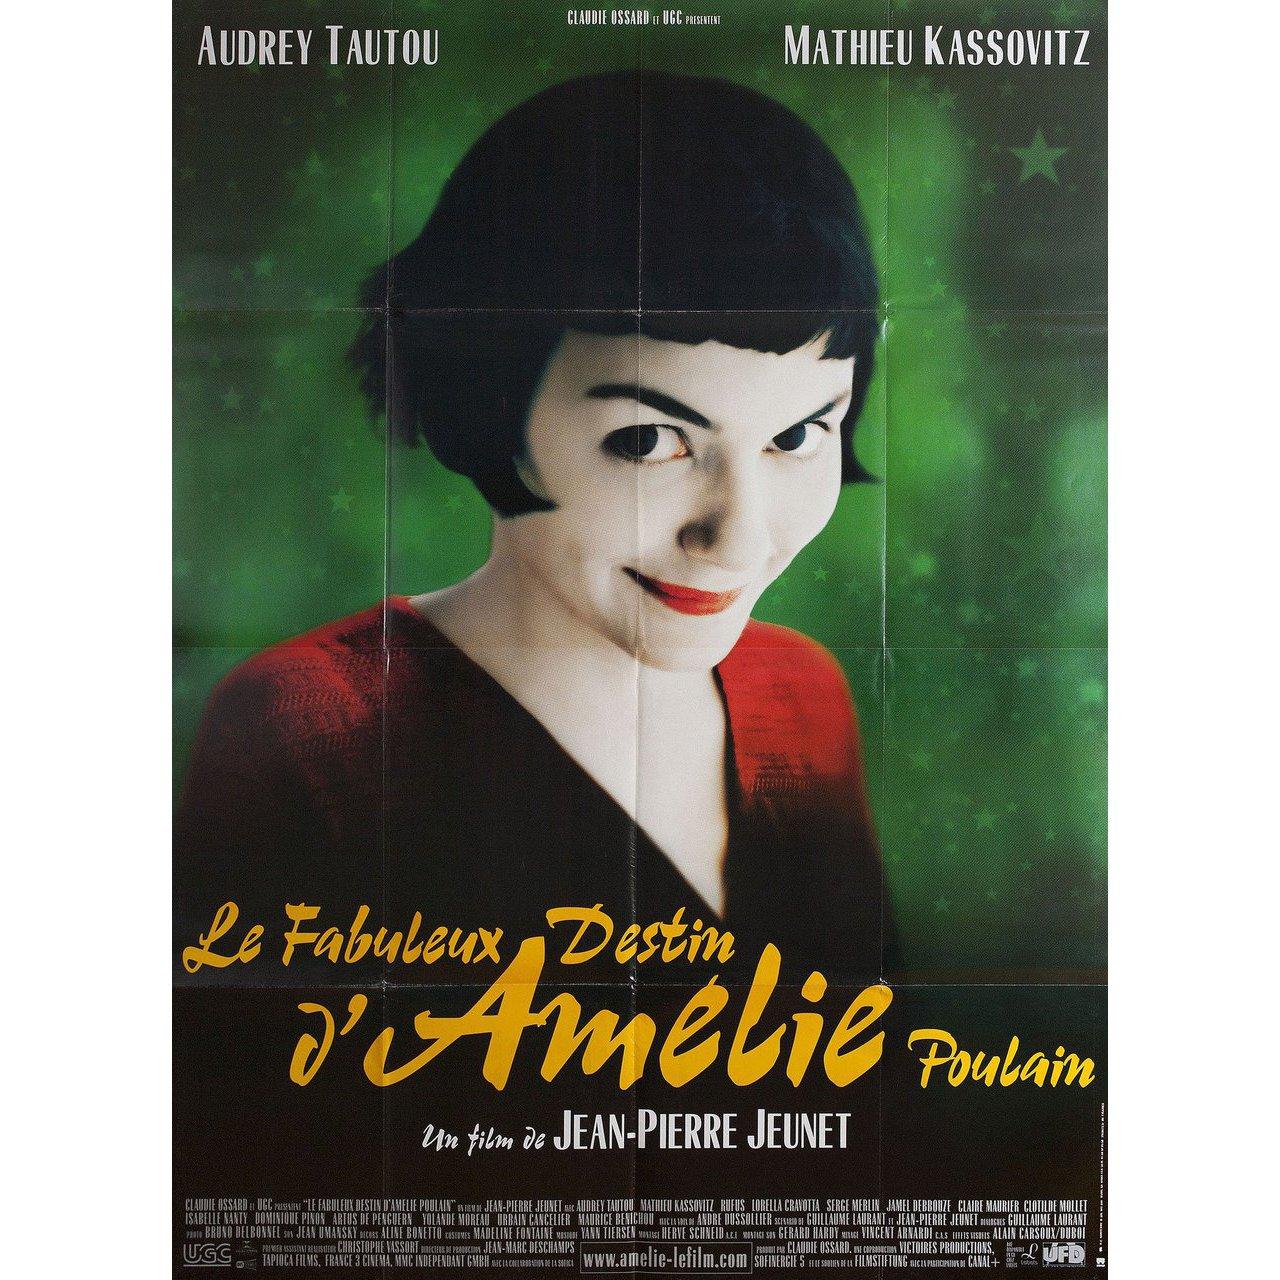 Original 2001 French grande poster by Laurent Lufroy for. Fine condition, folded. Many original posters were issued folded or were subsequently folded. Please note: the size is stated in inches and the actual size can vary by an inch or more.
 